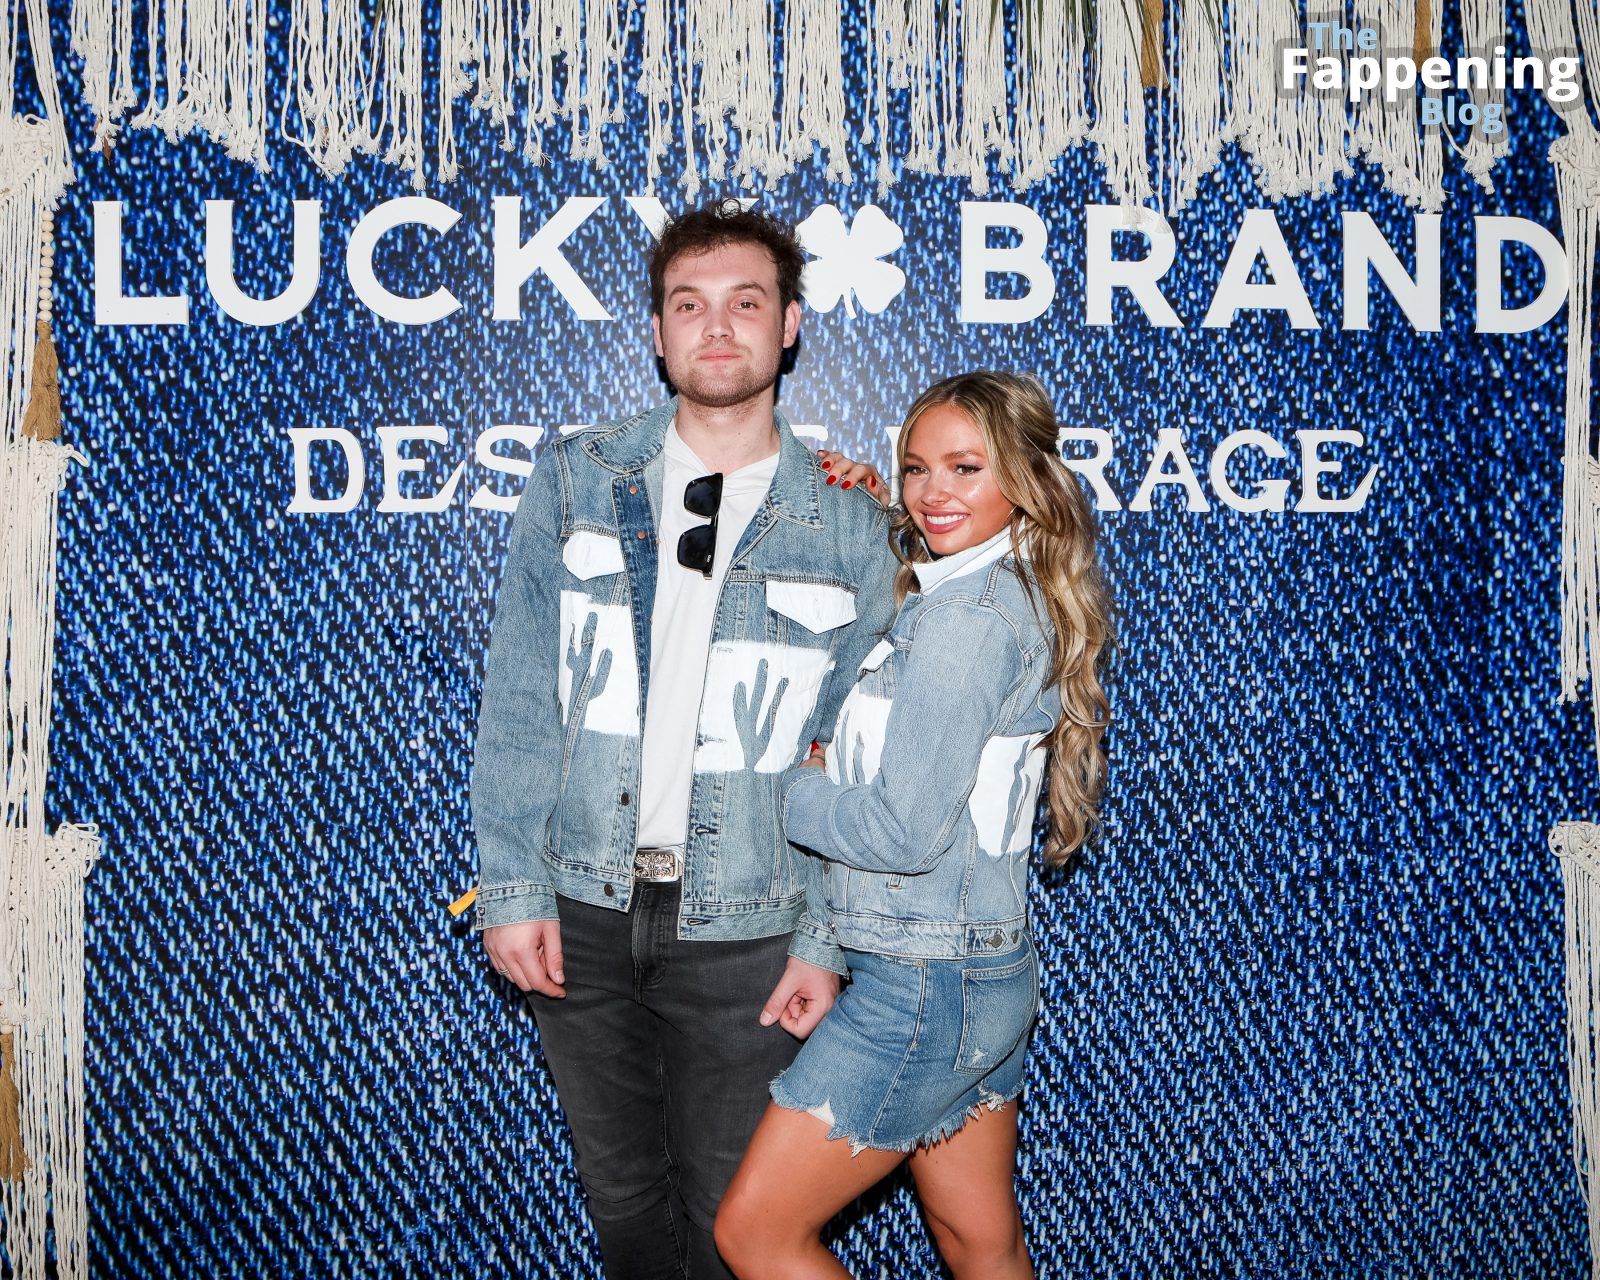 Natalie Alyn Lind Looks Stunning at Lucky Brand Desert Mirage in Indio (11 Photos)